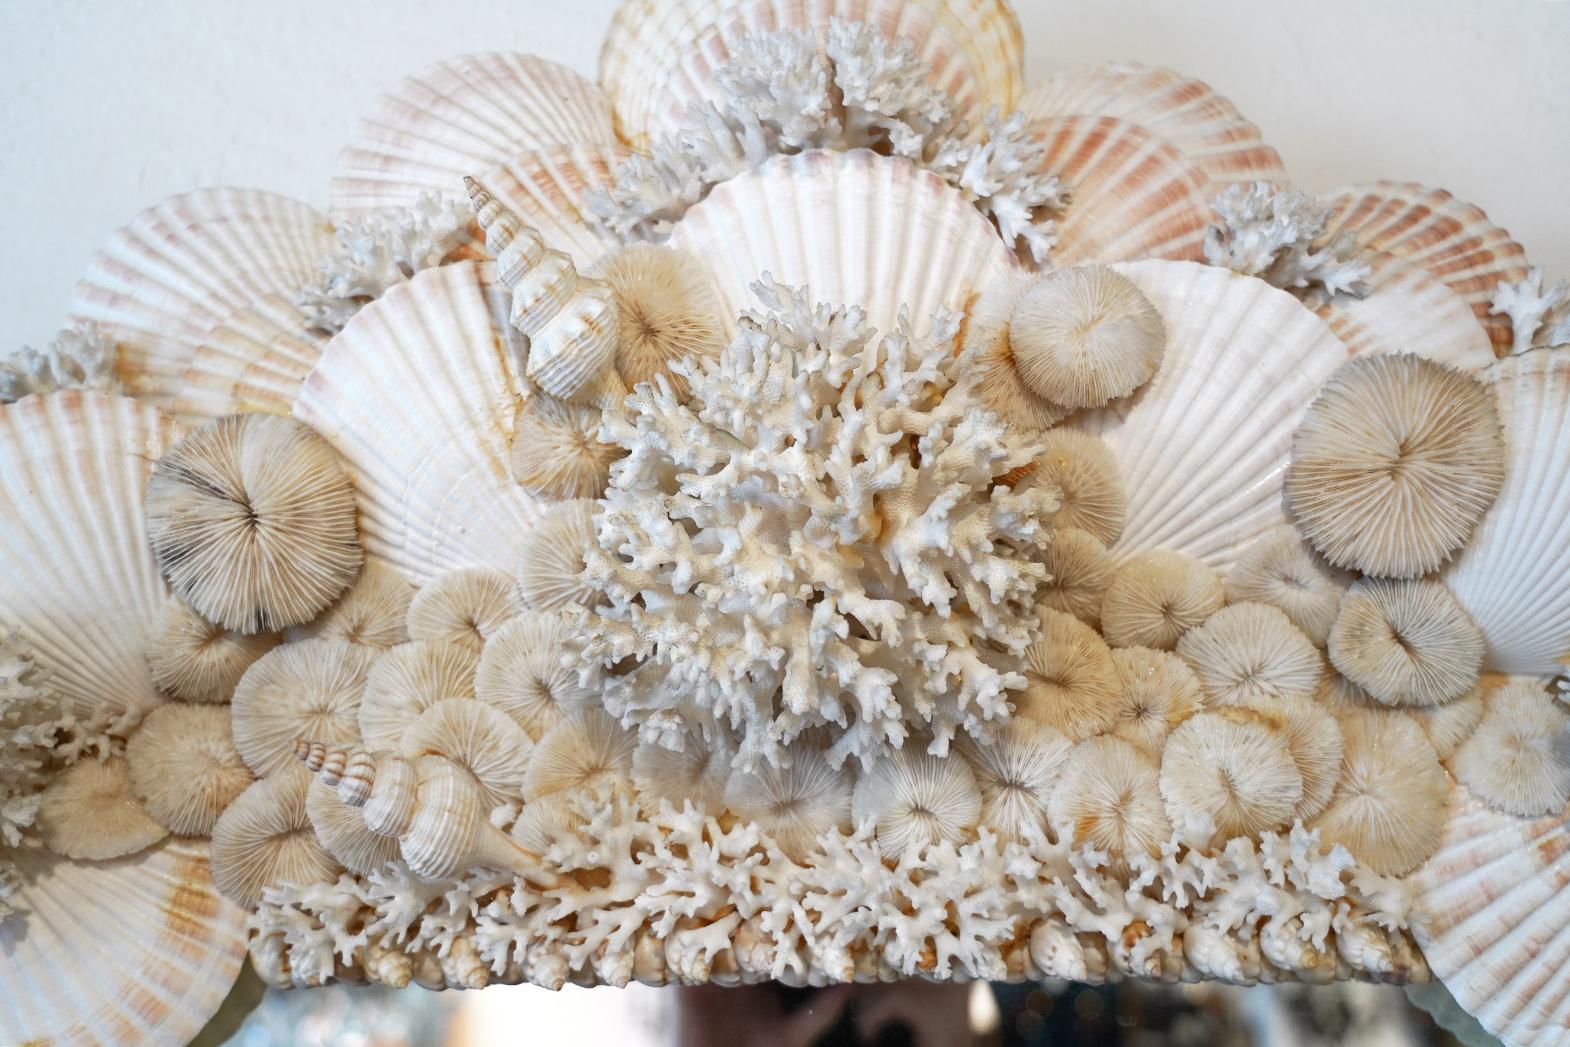 Organic Modern Large Vintage Seashell and Coral Encrusted Wall Mirror, Style of Christa Wilm